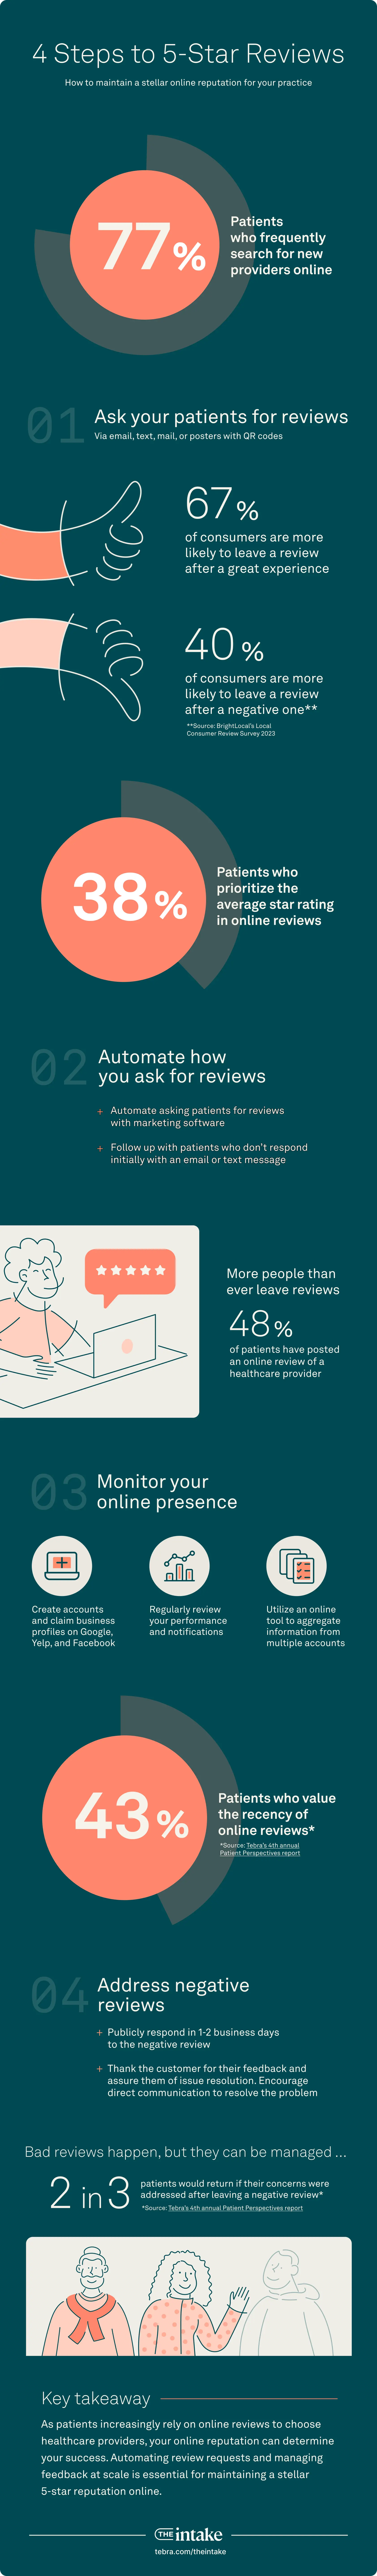 How to boost a healthcare practice's online reputation infographic